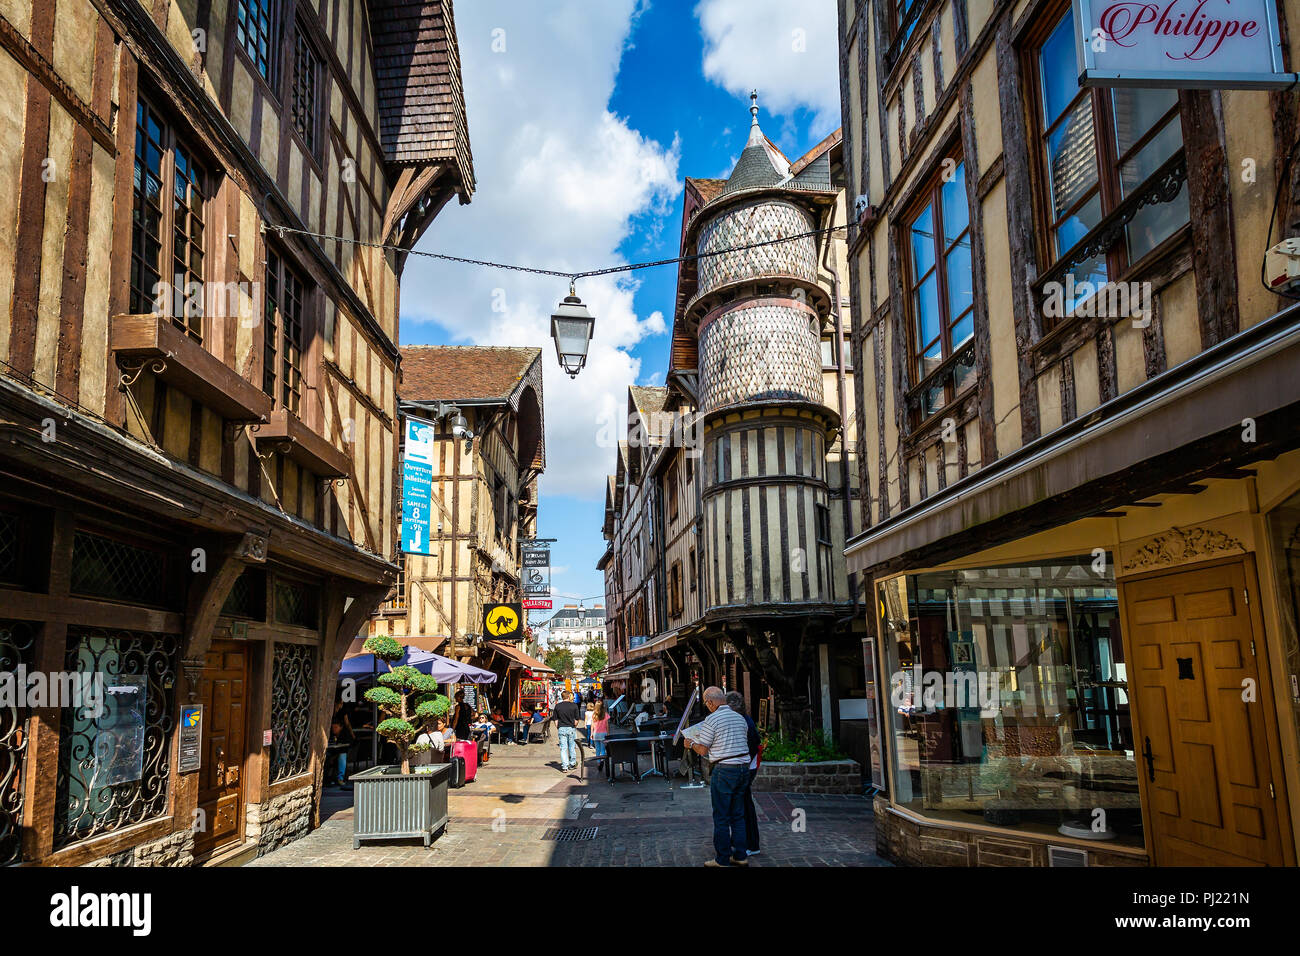 Turreted medieval bakers house in historic centre of Troyes with half timbered buildings in Troyes, Aube, France on 31 August 2018 Stock Photo